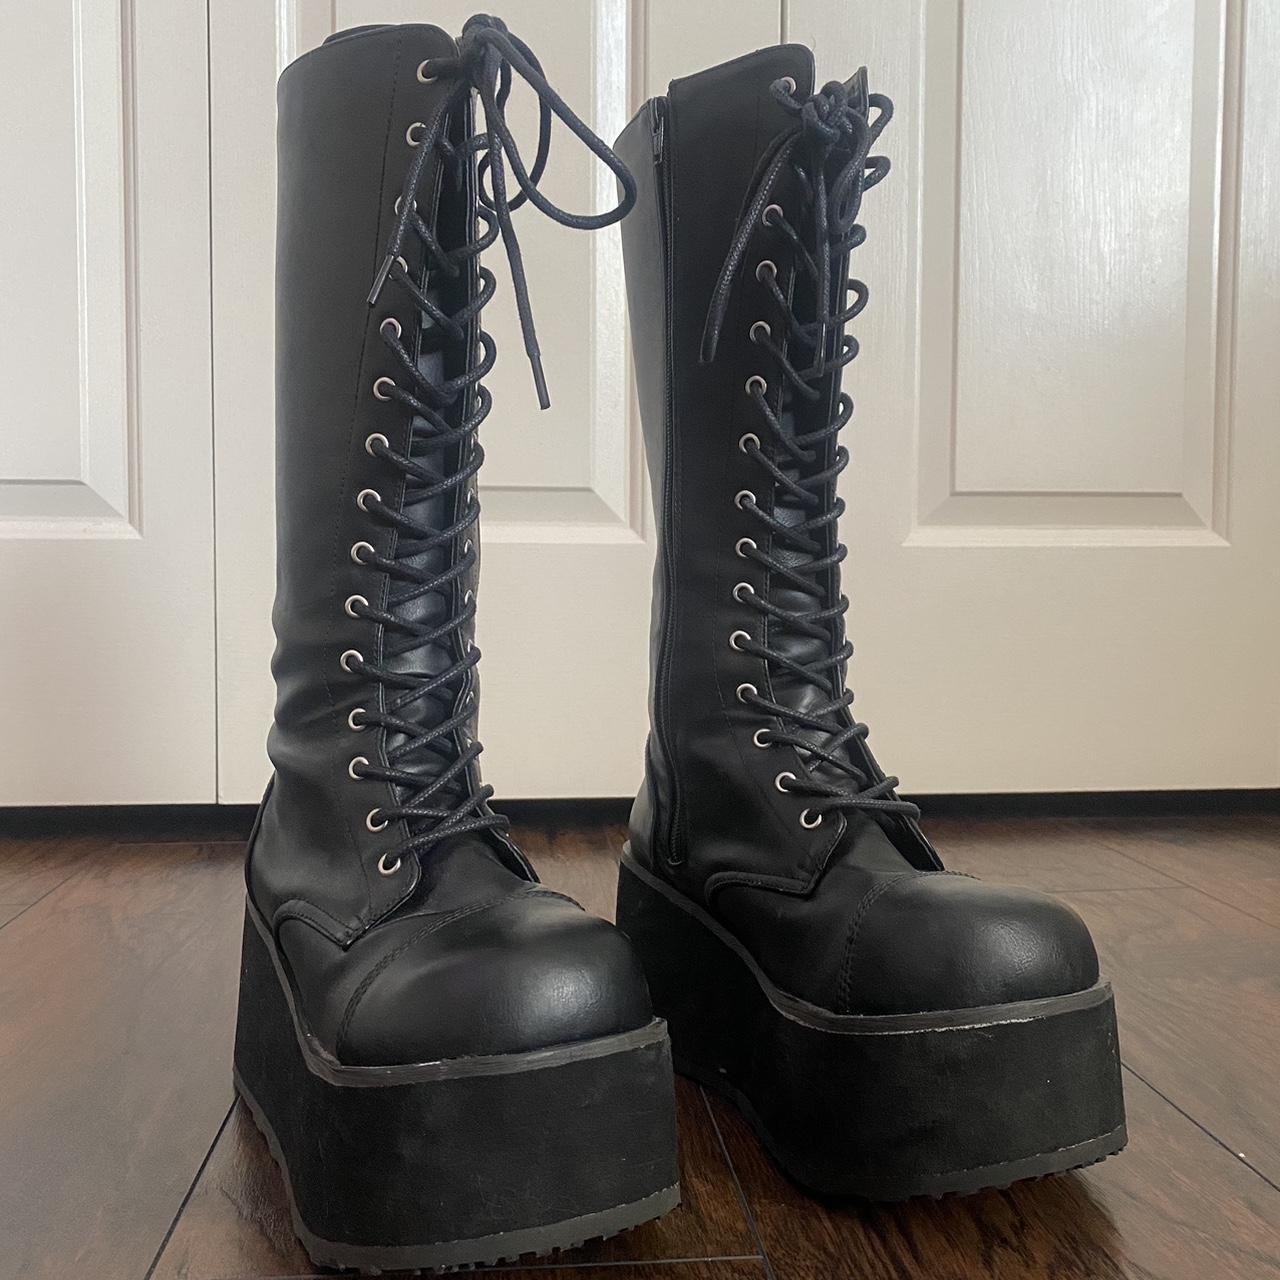 Stomp You Out Platform Boots Says Size 6 but i would... - Depop